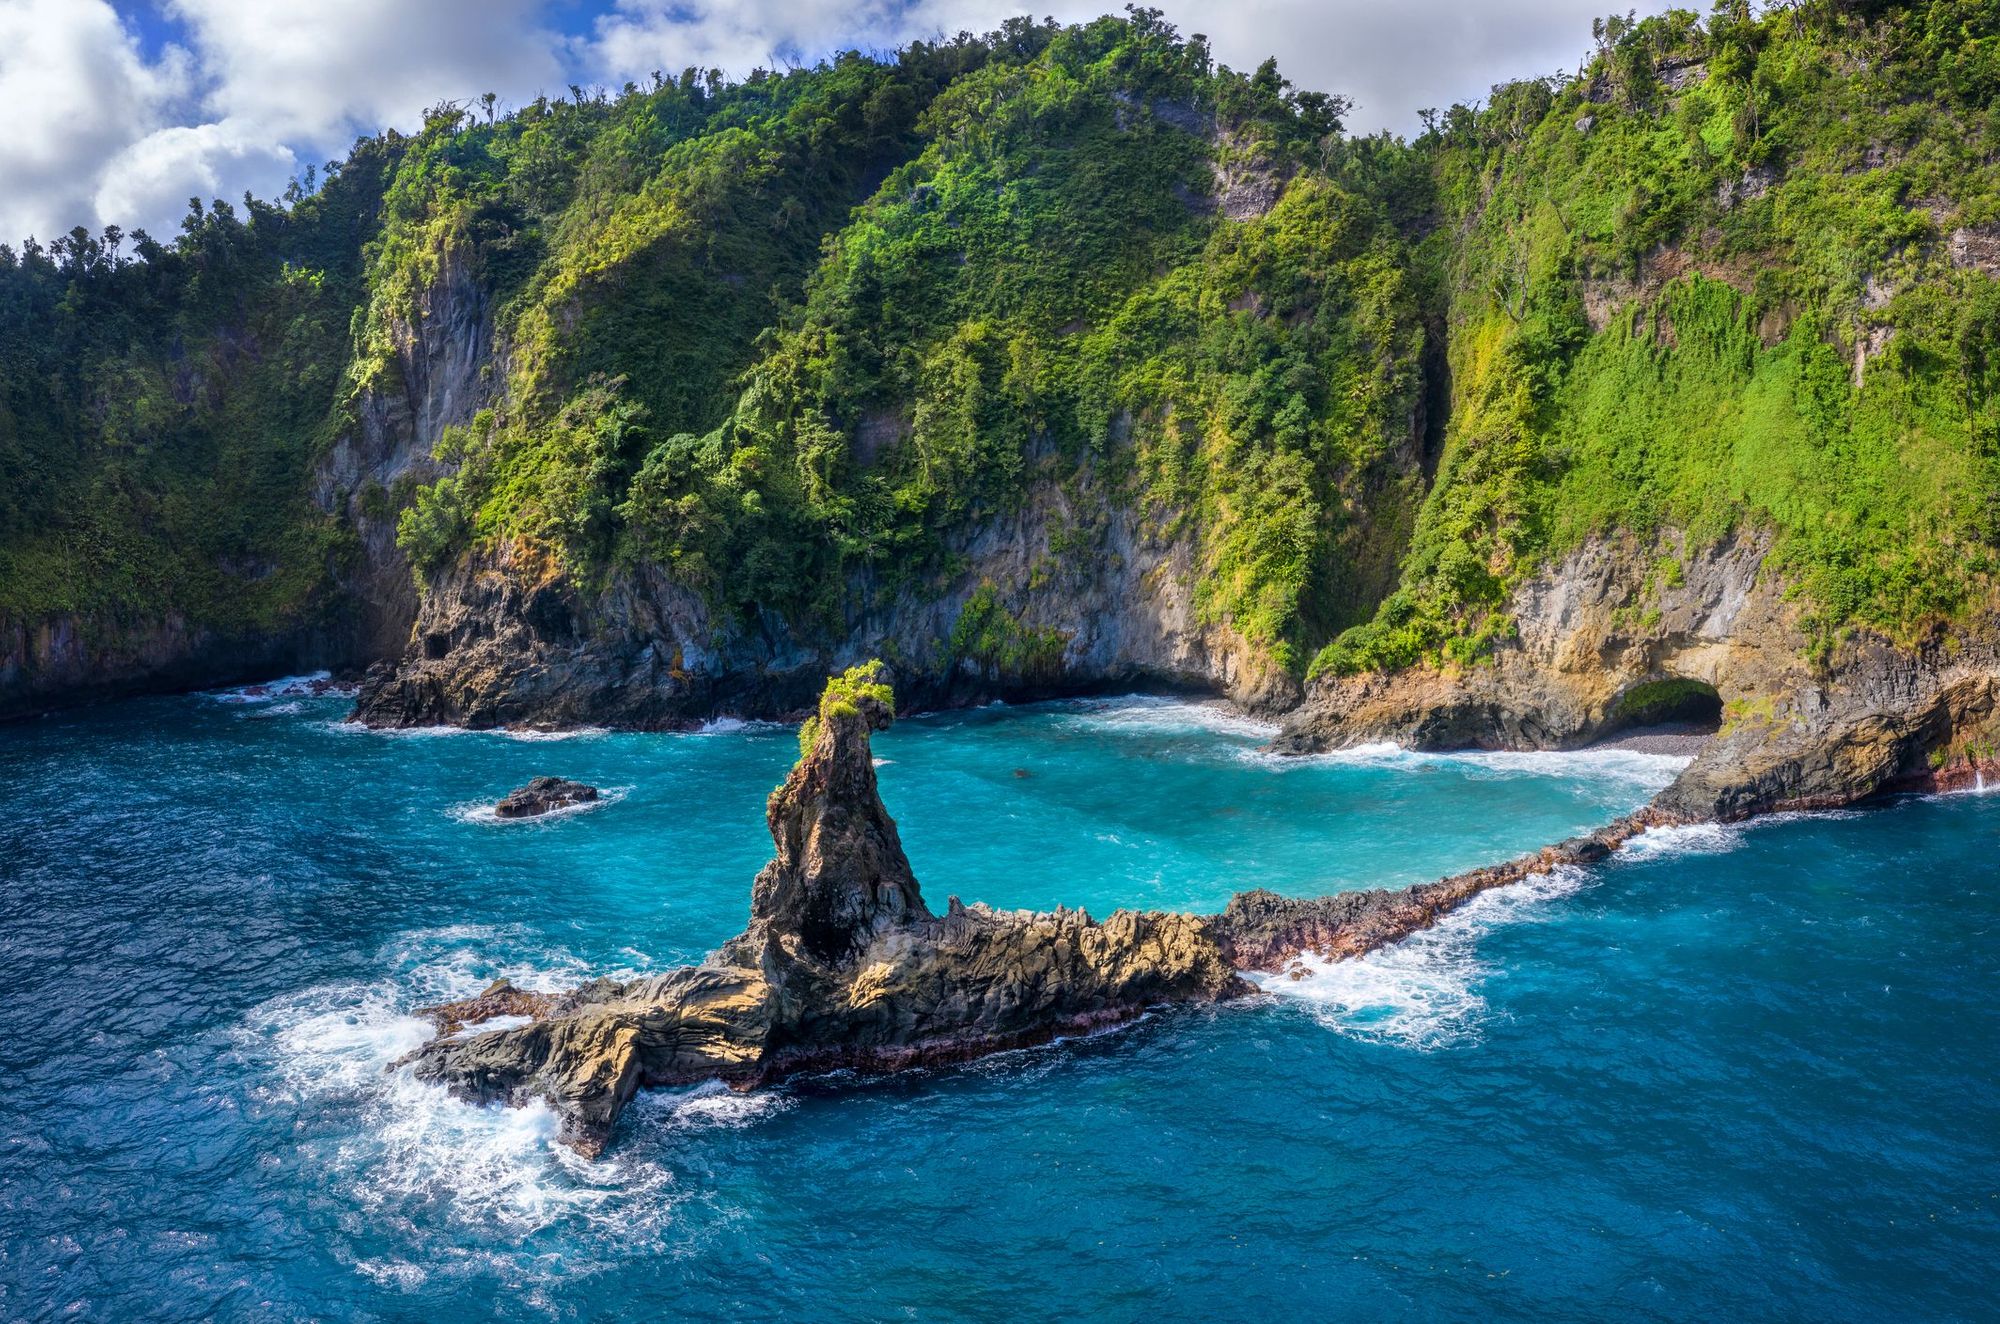 The vibrant coast of Dominica, lined with dramatic cliffs and rock formations.